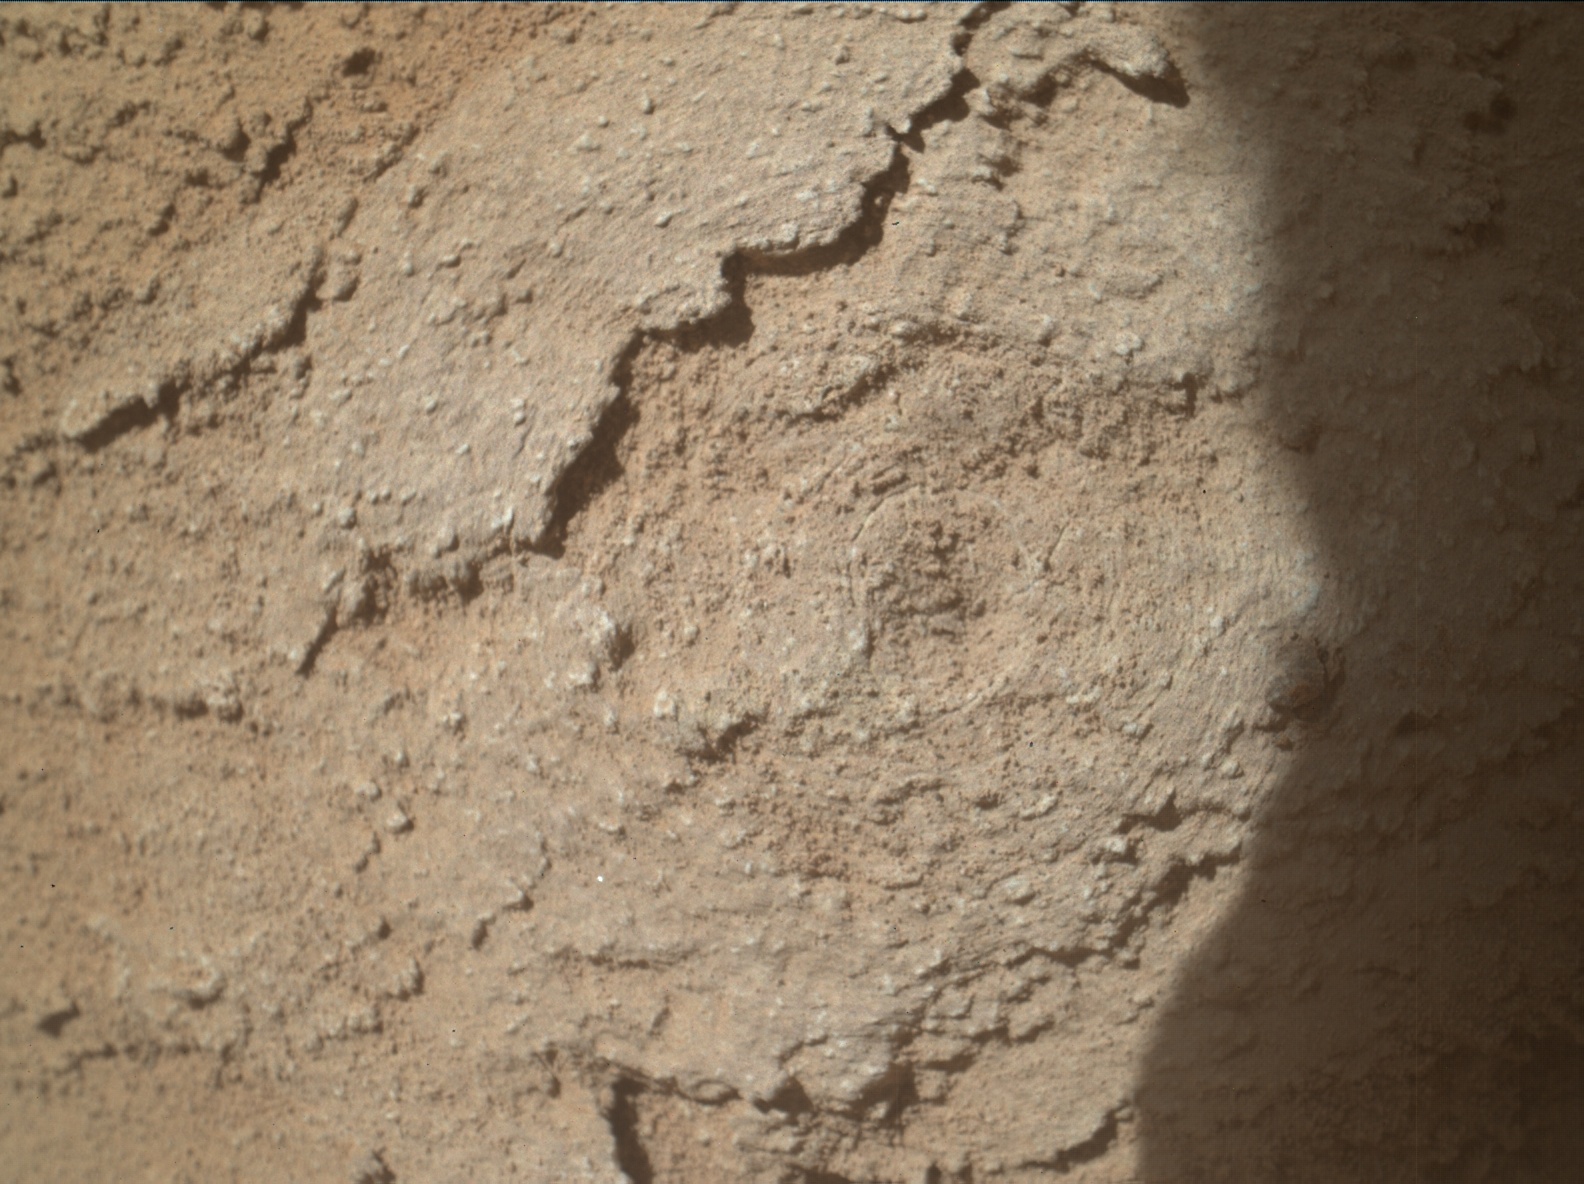 Nasa's Mars rover Curiosity acquired this image using its Mars Hand Lens Imager (MAHLI) on Sol 3880